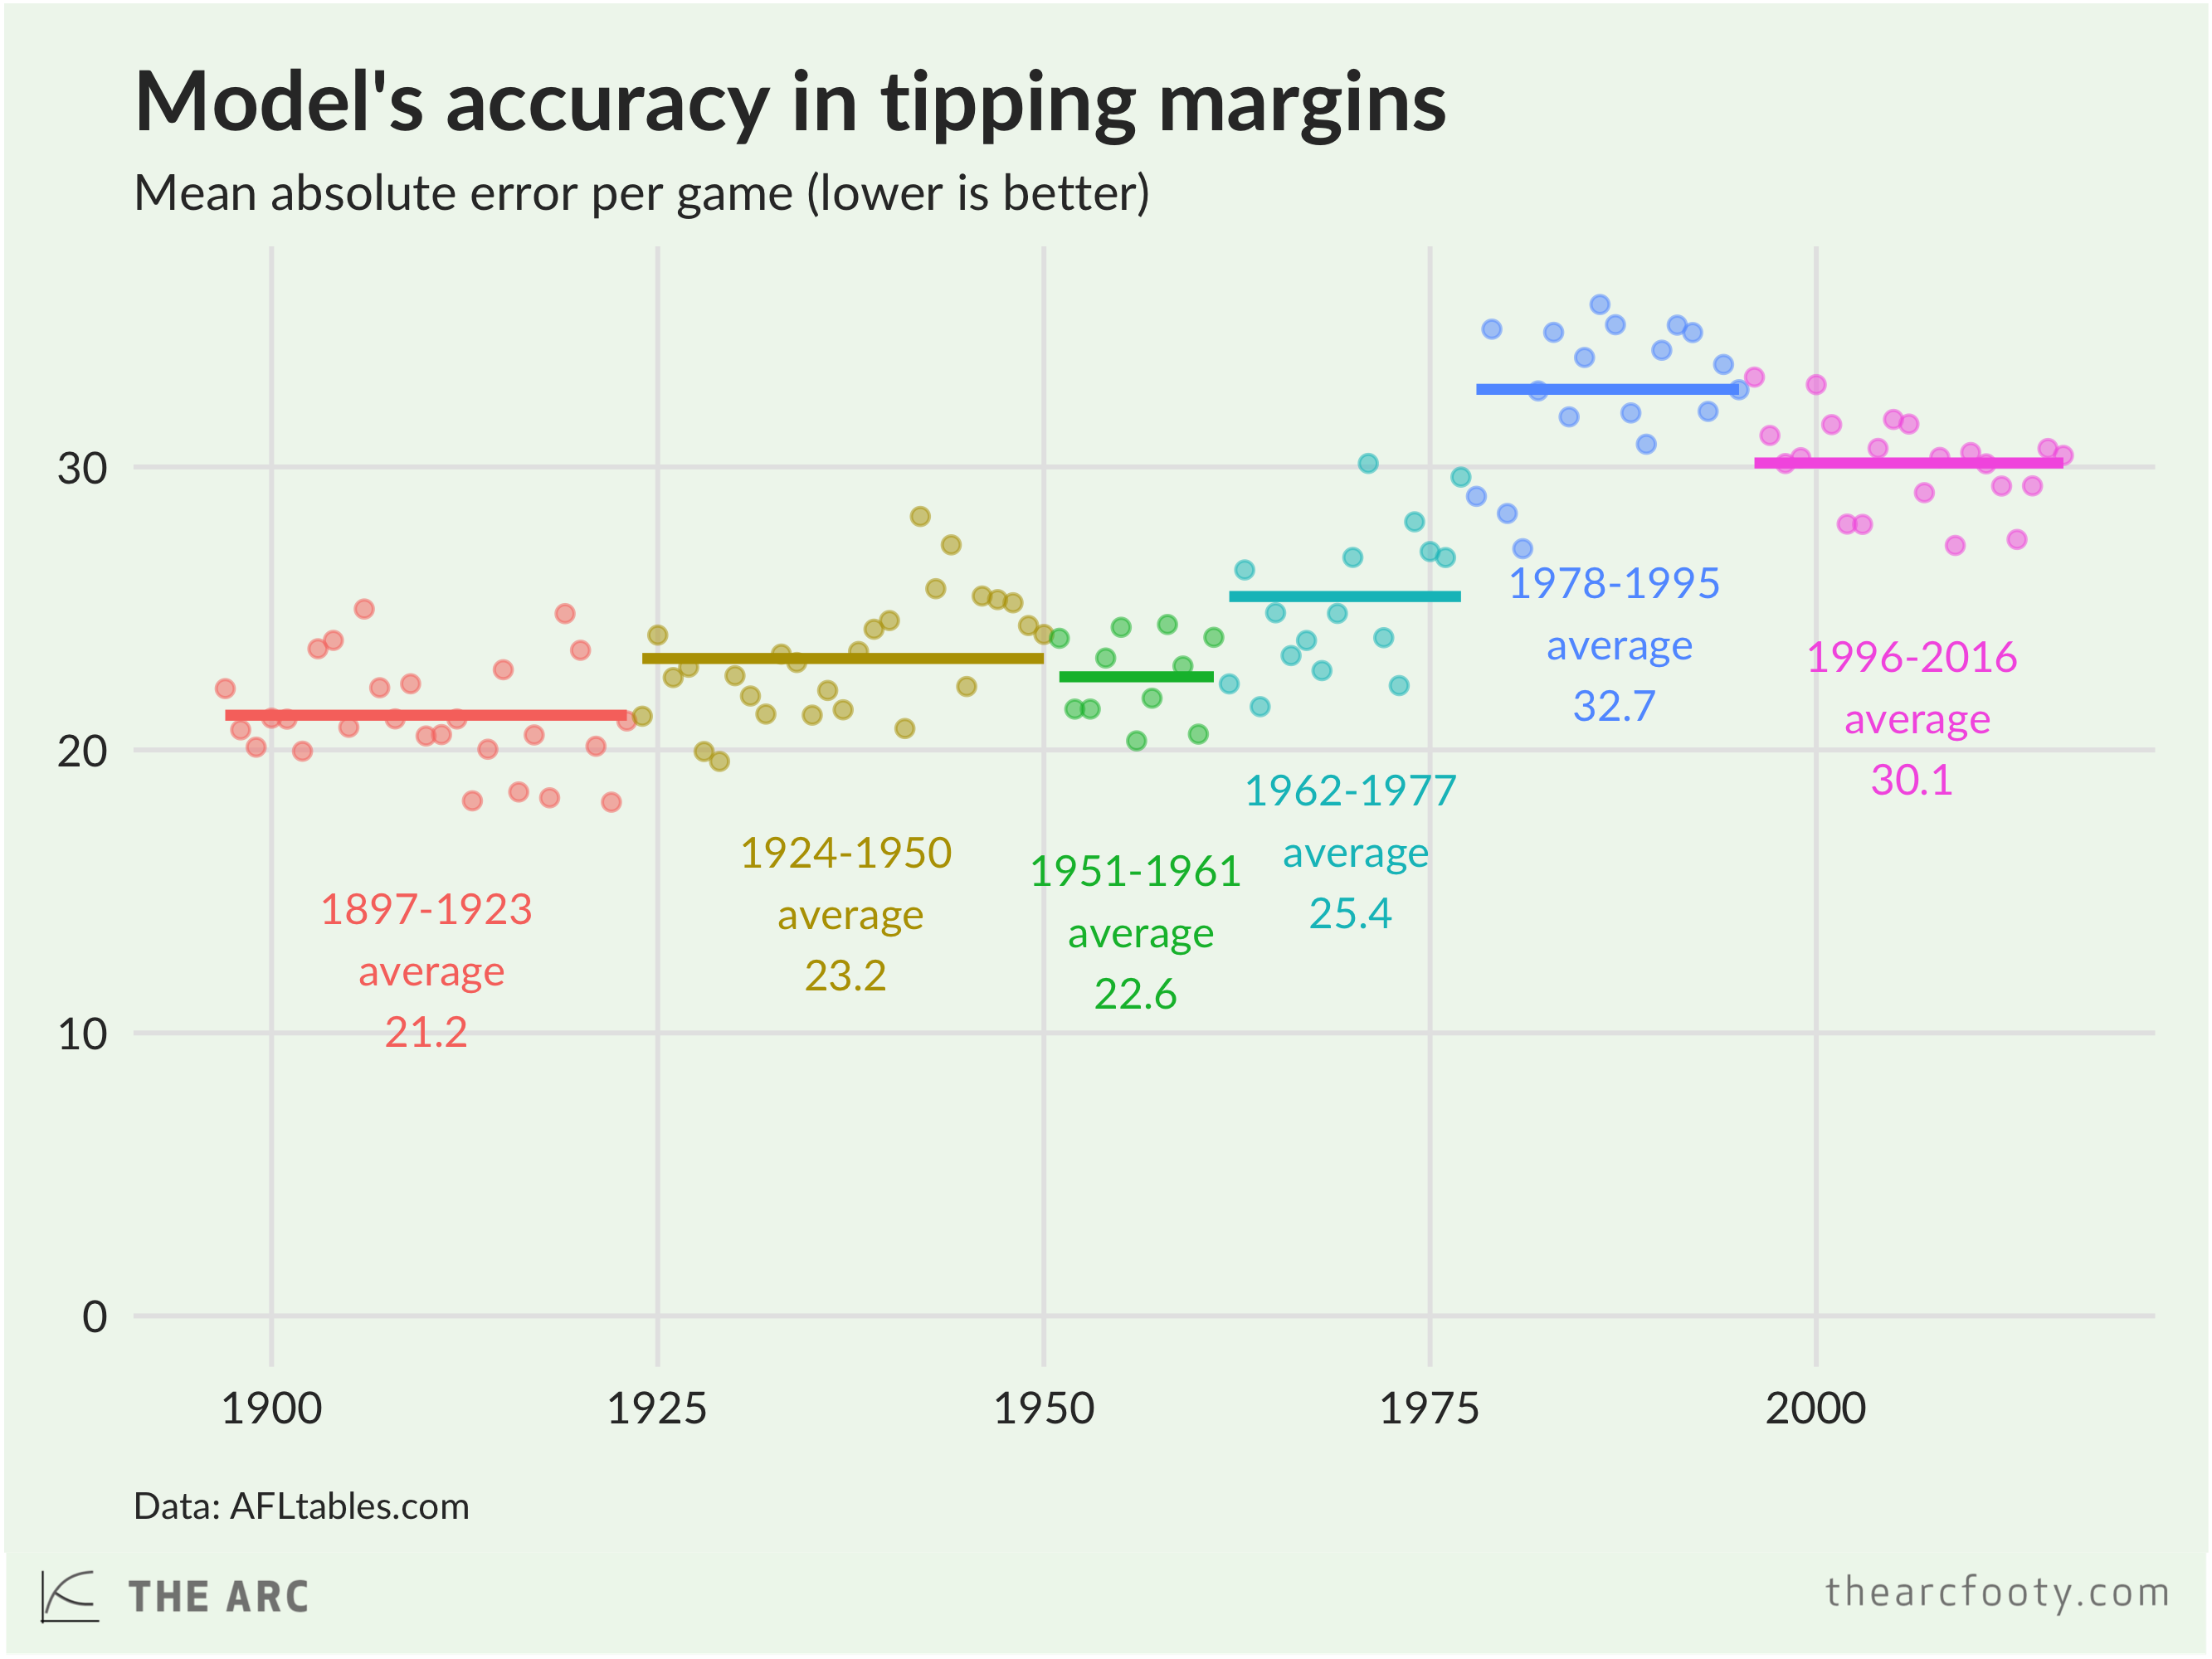 Elo model's accuracy in tipping margins